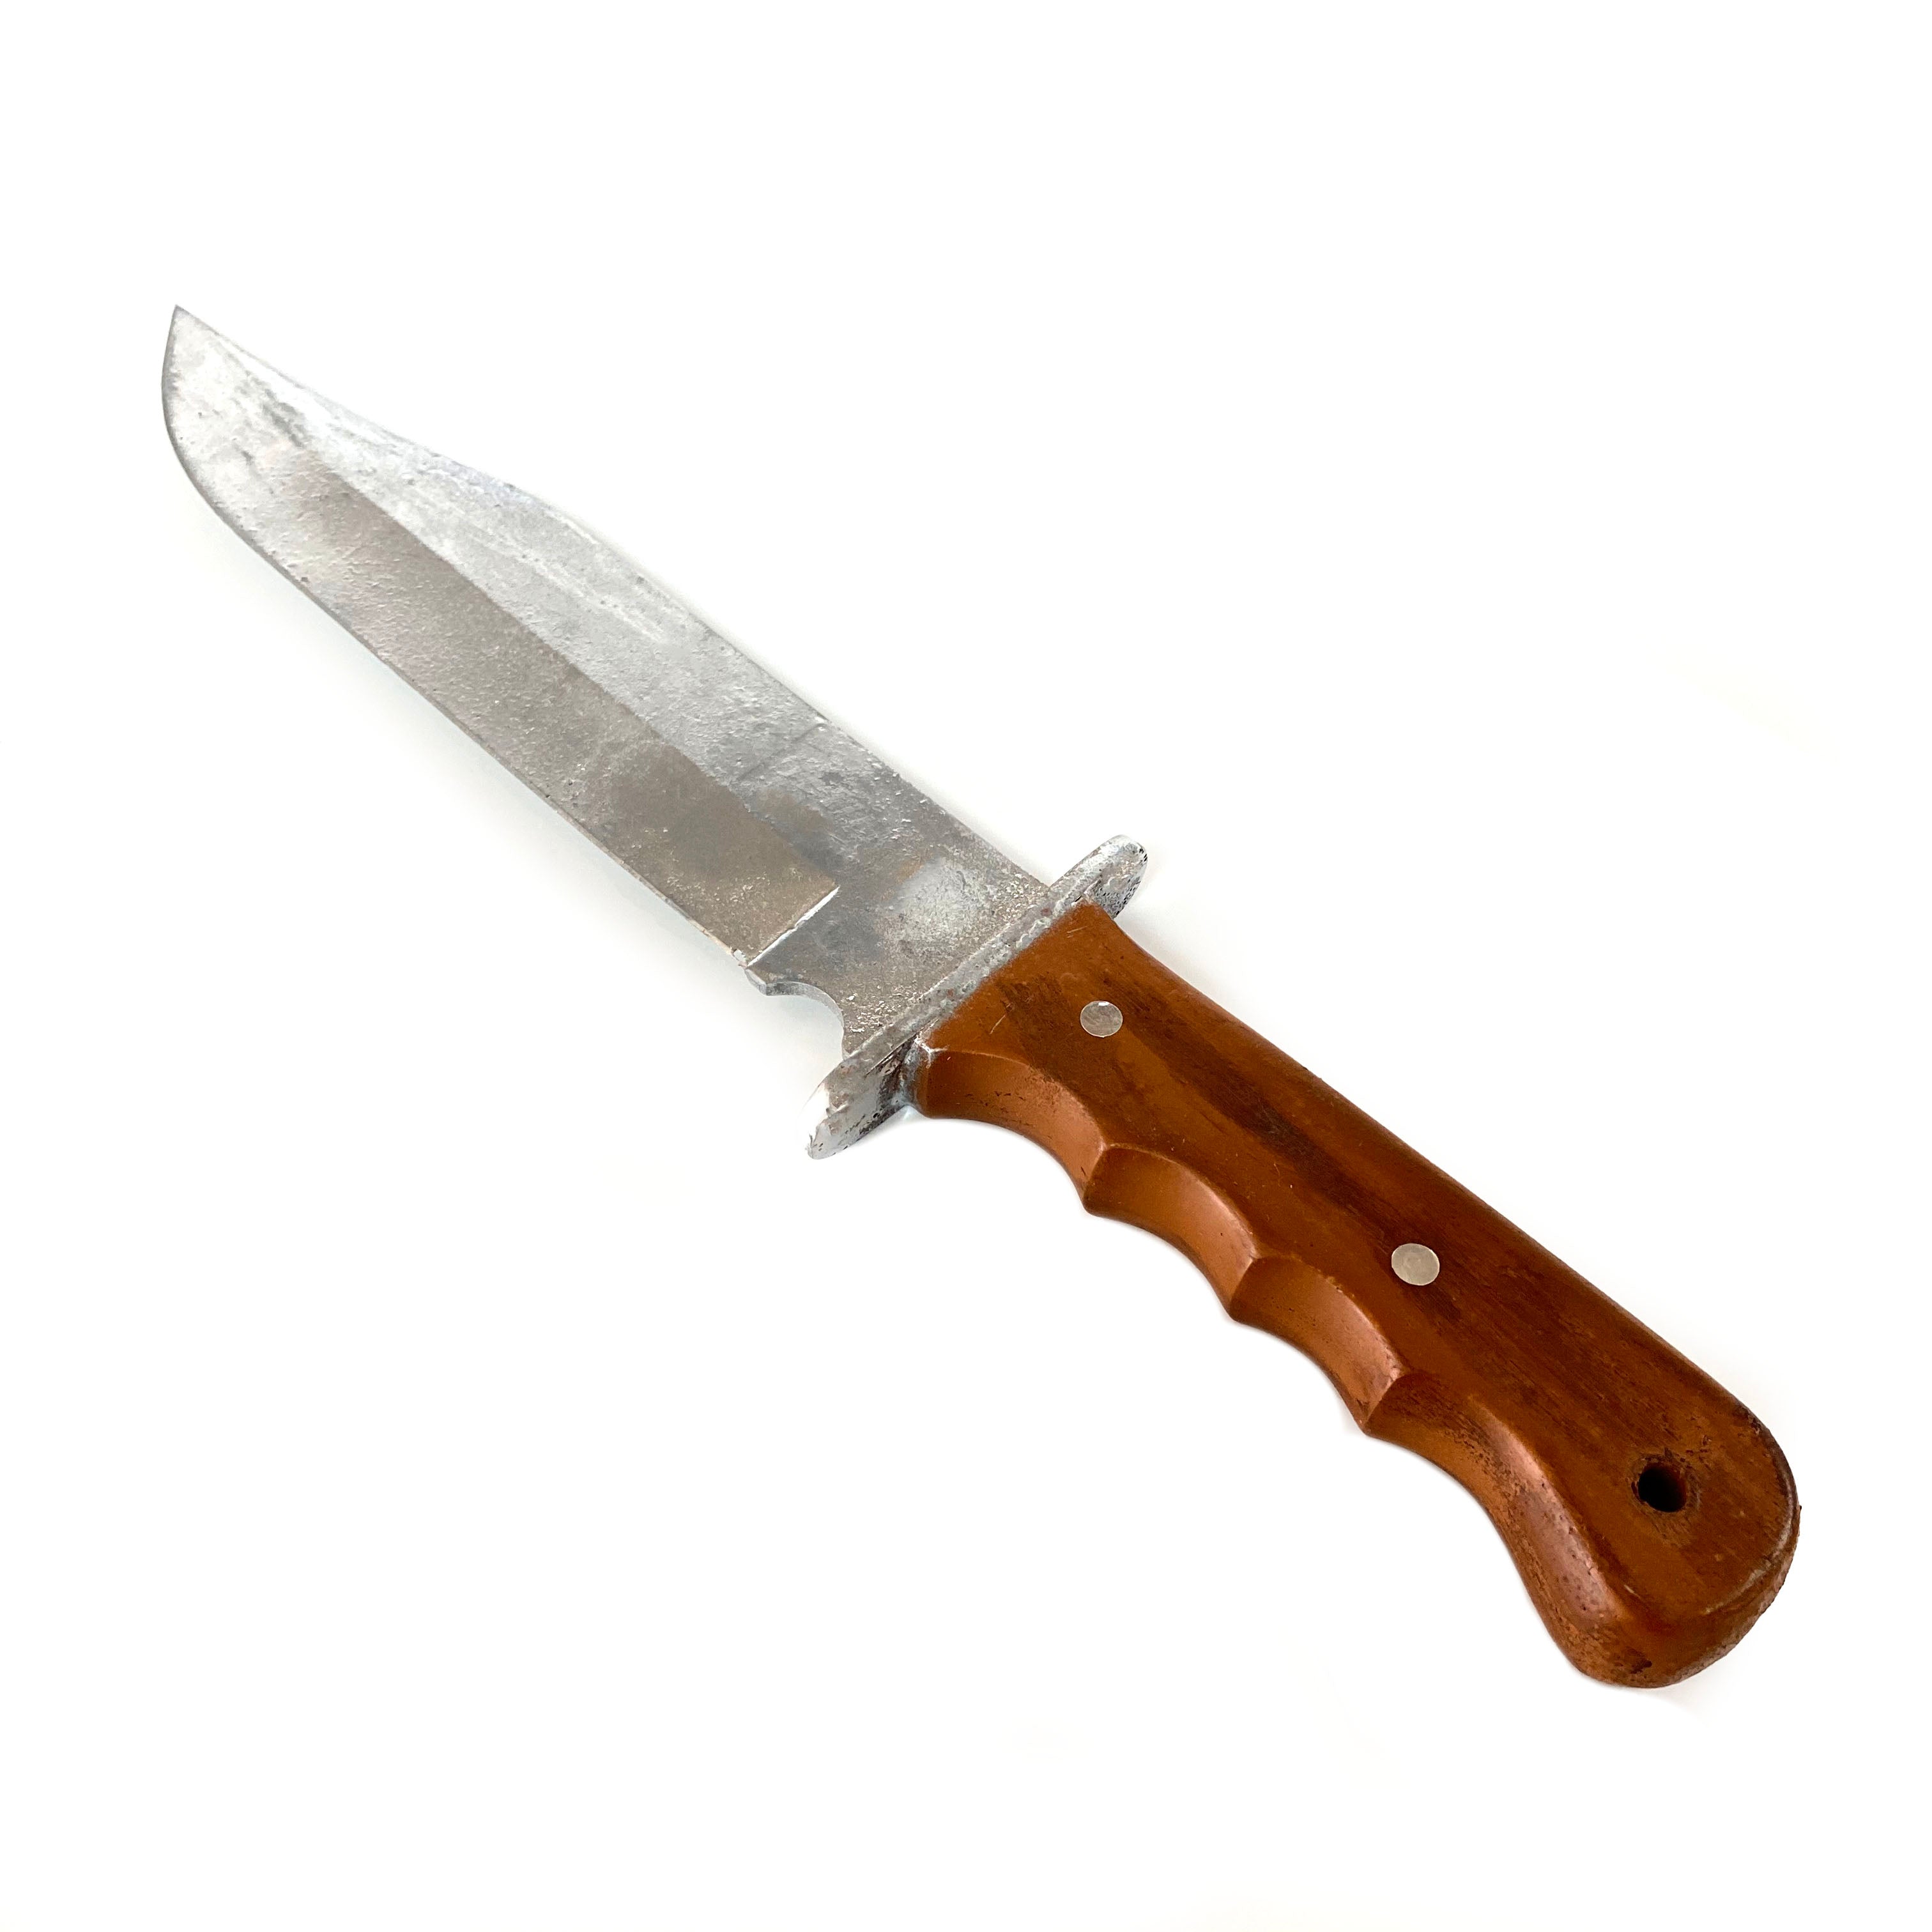 Rigid Plastic Winchester Bowie Knife Replica - New - Silver Blade with Brown Handle